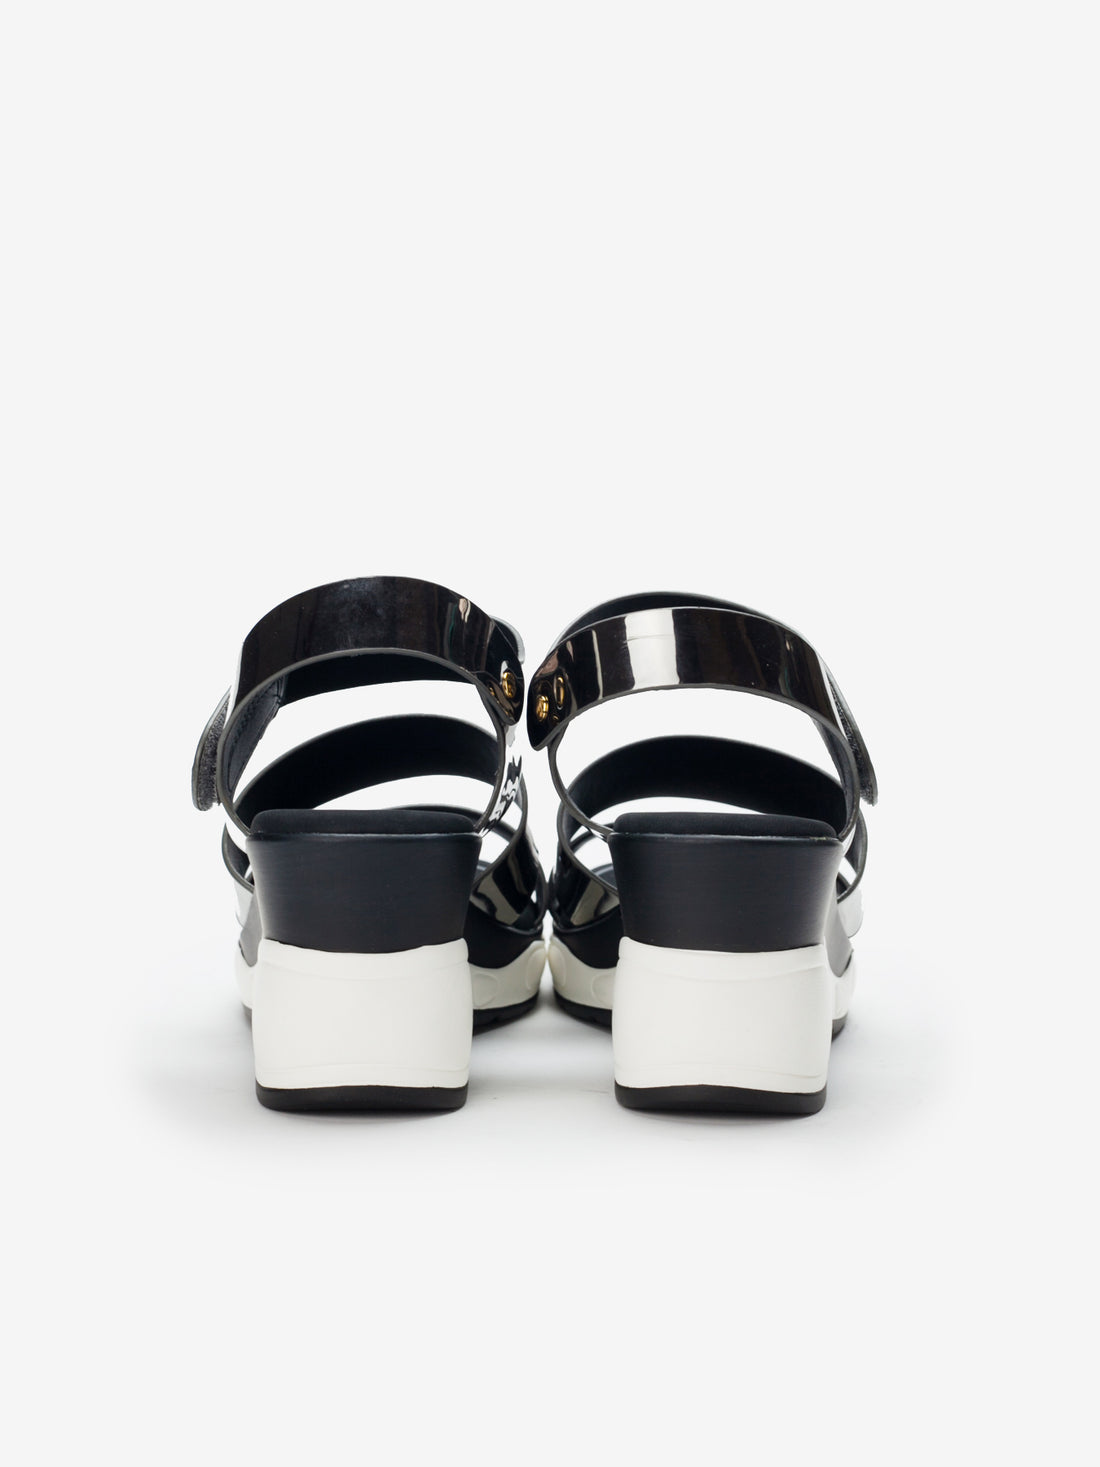 Larrie Silver Stylish Fashionable Sandals